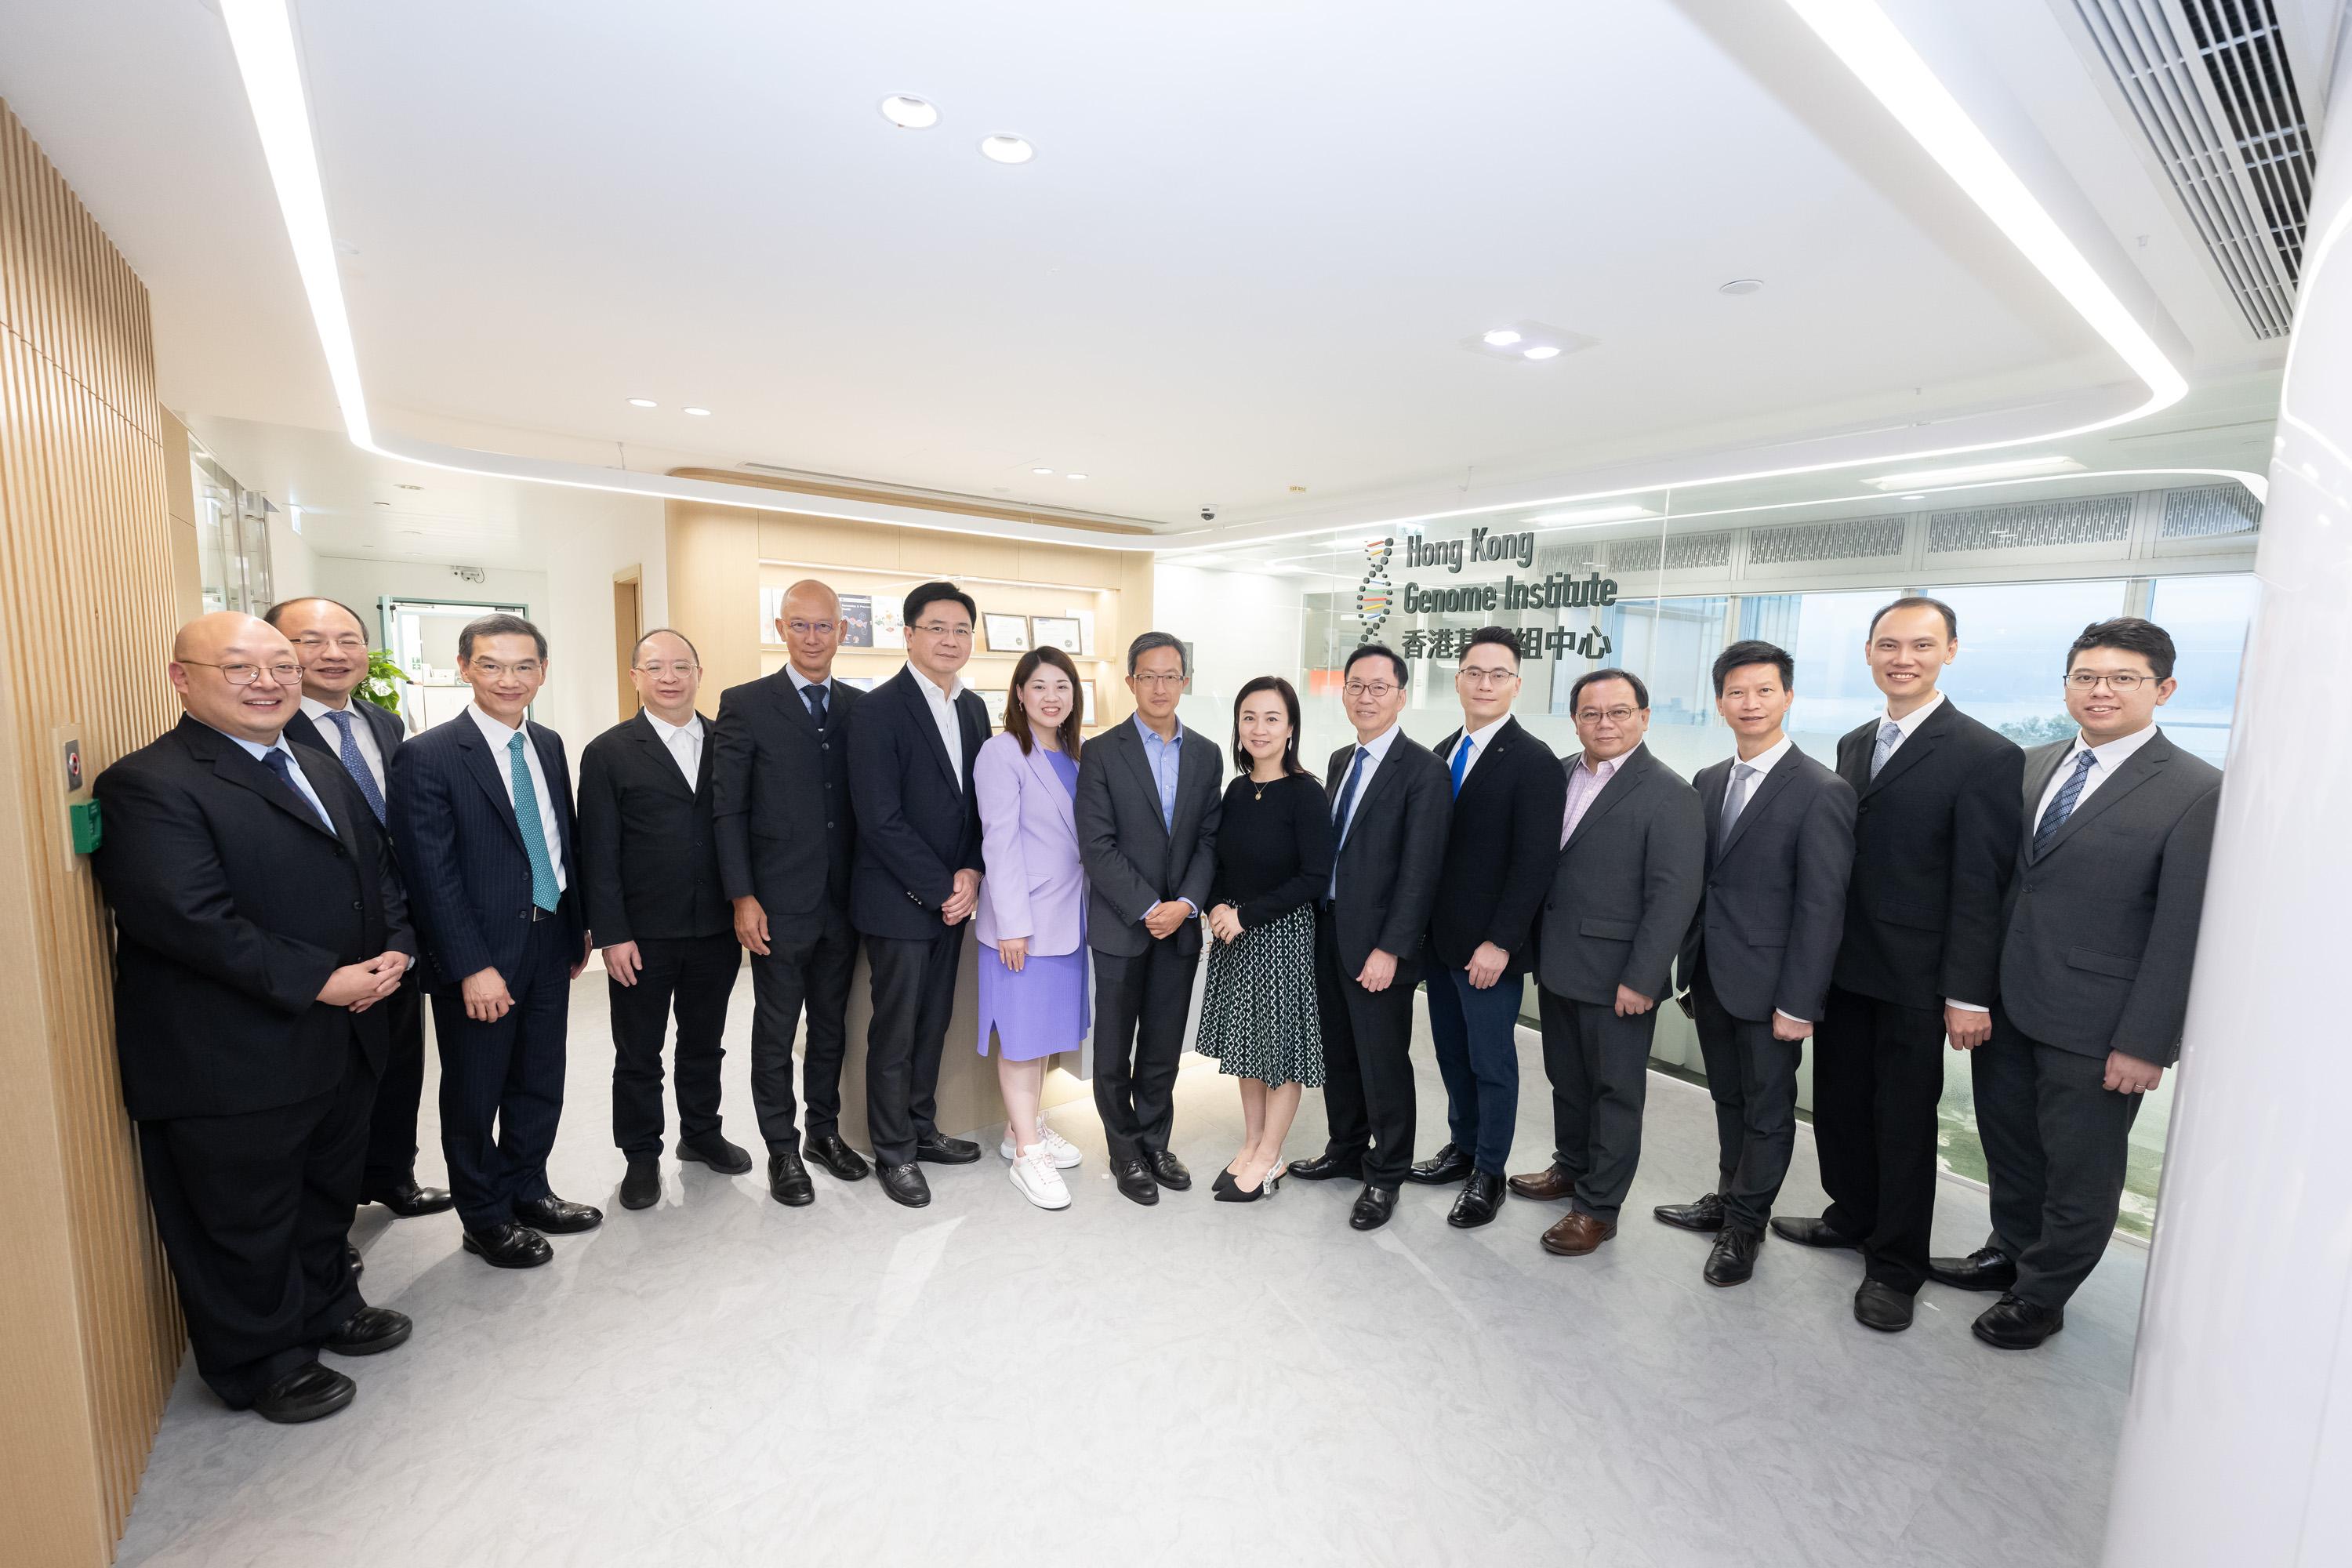 The Legislative Council (LegCo) Panel on Health Services visits the Hong Kong Genome Institute (HKGI) today (May 2). Photos shows the Chairman of the LegCo Panel on Health Services, Ms Chan Hoi-yan (seventh right), the Deputy Chairman, Dr David Lam (eighth right) and other Panel members with the representatives of the HKGI and the Administration.
